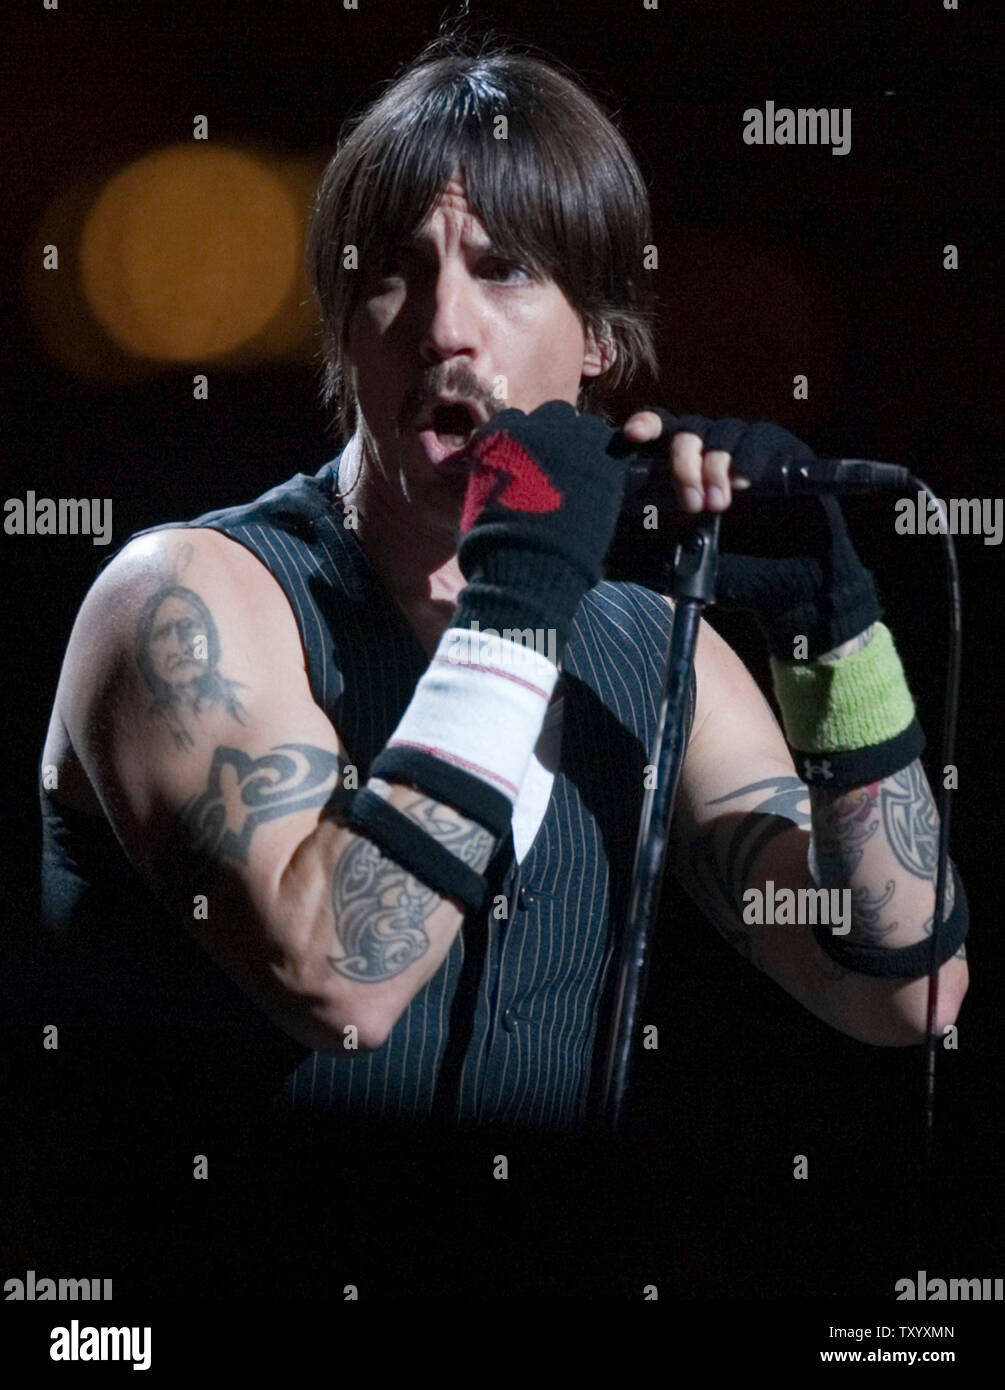 Anthony Kiedis lead singer of The Red Hot Chili Peppers sings a song during  their set on the second day at the Cochella Music Festival in Indio,  California on April 28, 2007. (